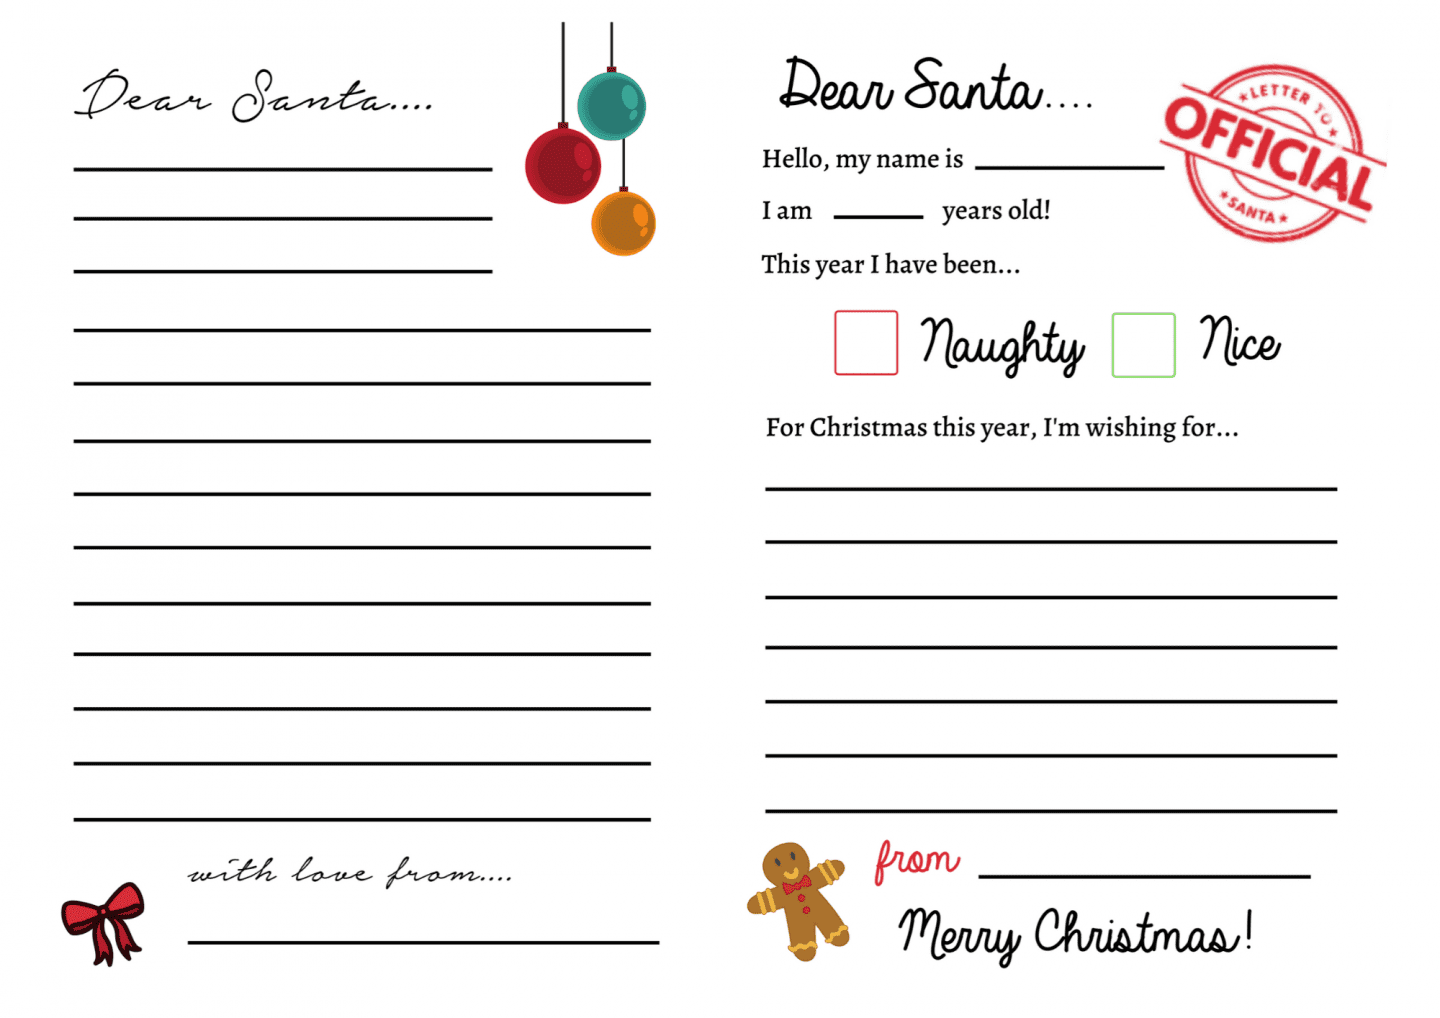 Create a Free Printable Santa Letter in 3 Easy Steps! Personalize your Letter from Santa with customized text and colorful designs to suit your child.